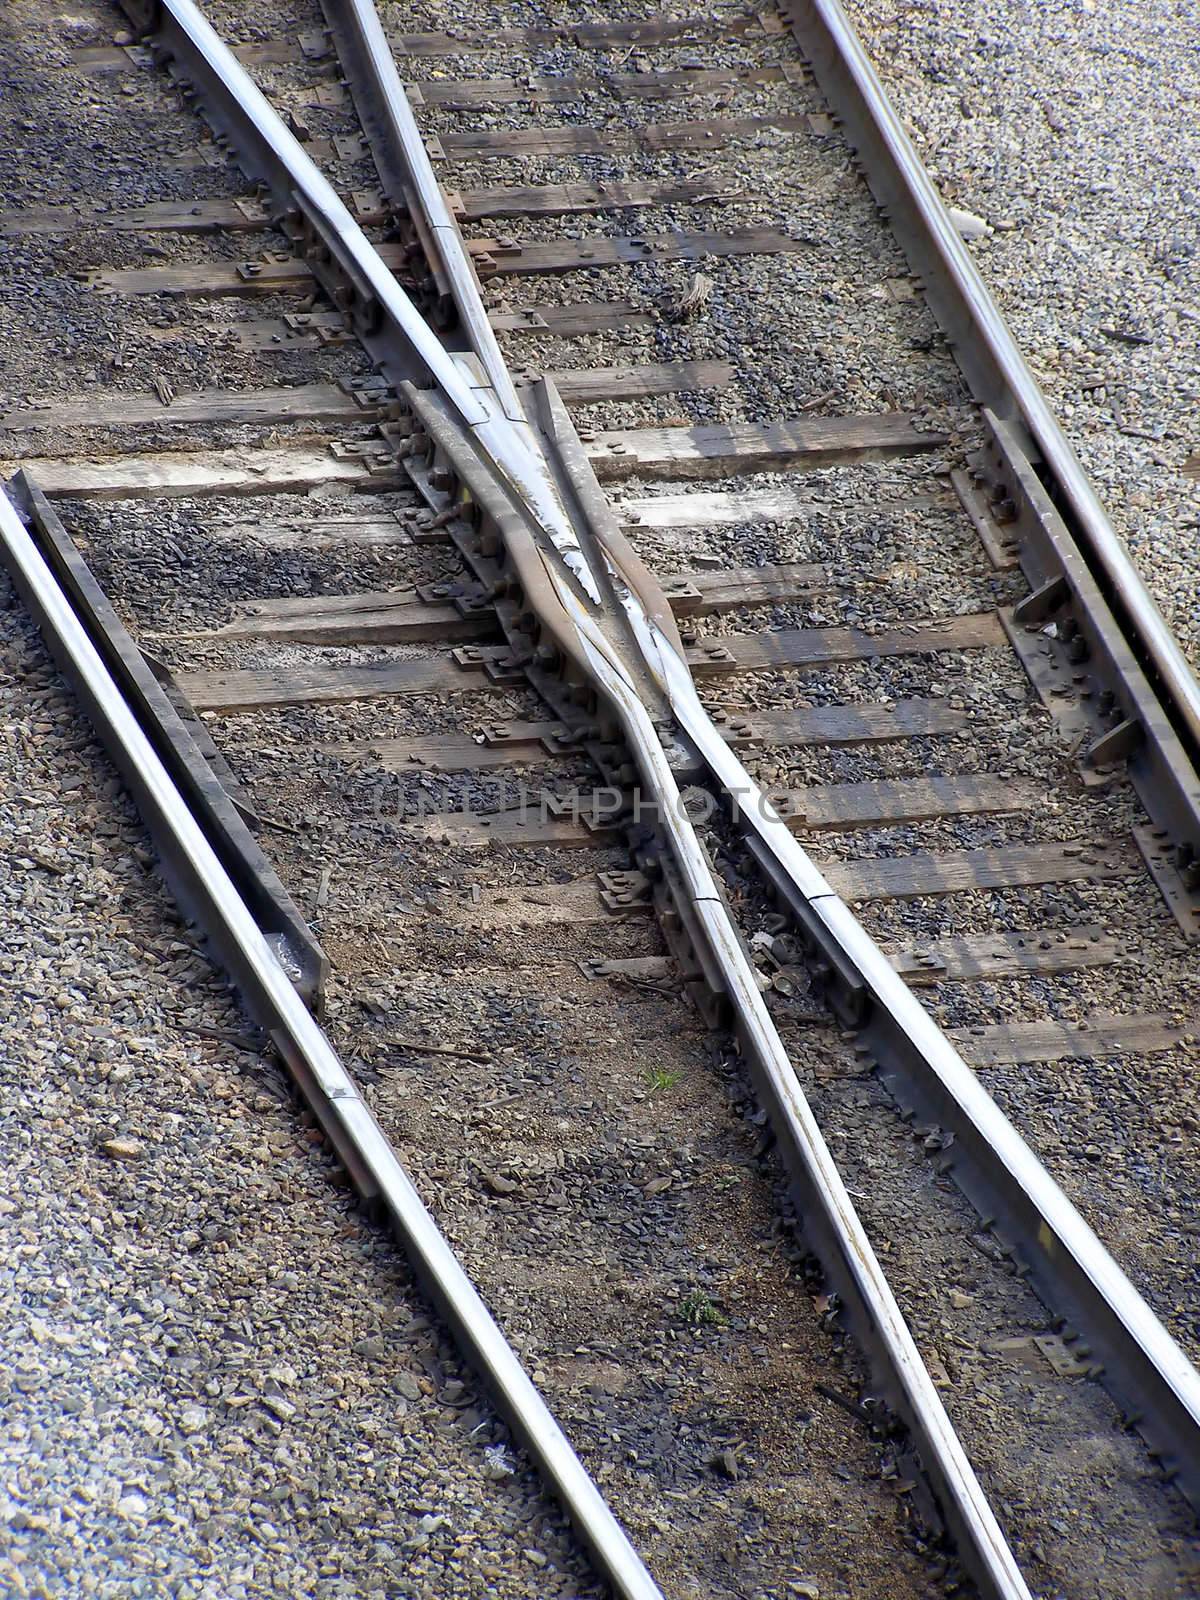 Detail of railroad switch with rails, ties and gravel